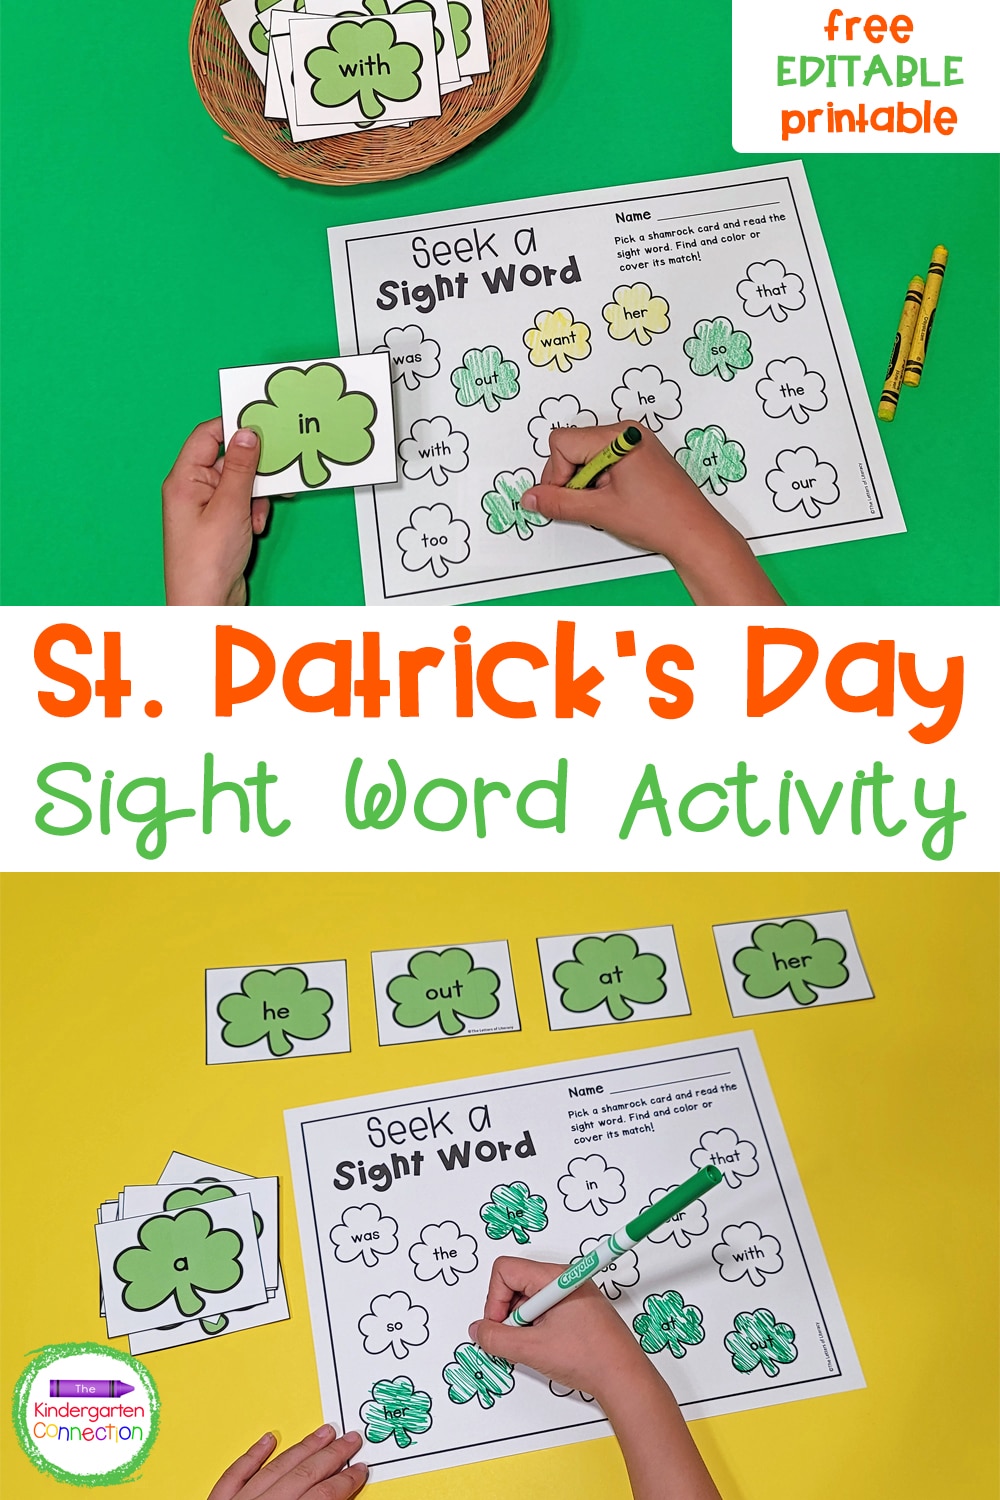 This FREE editable St. Patrick's Day Sight Word Game is great for literacy centers or partner work in Kindergarten!